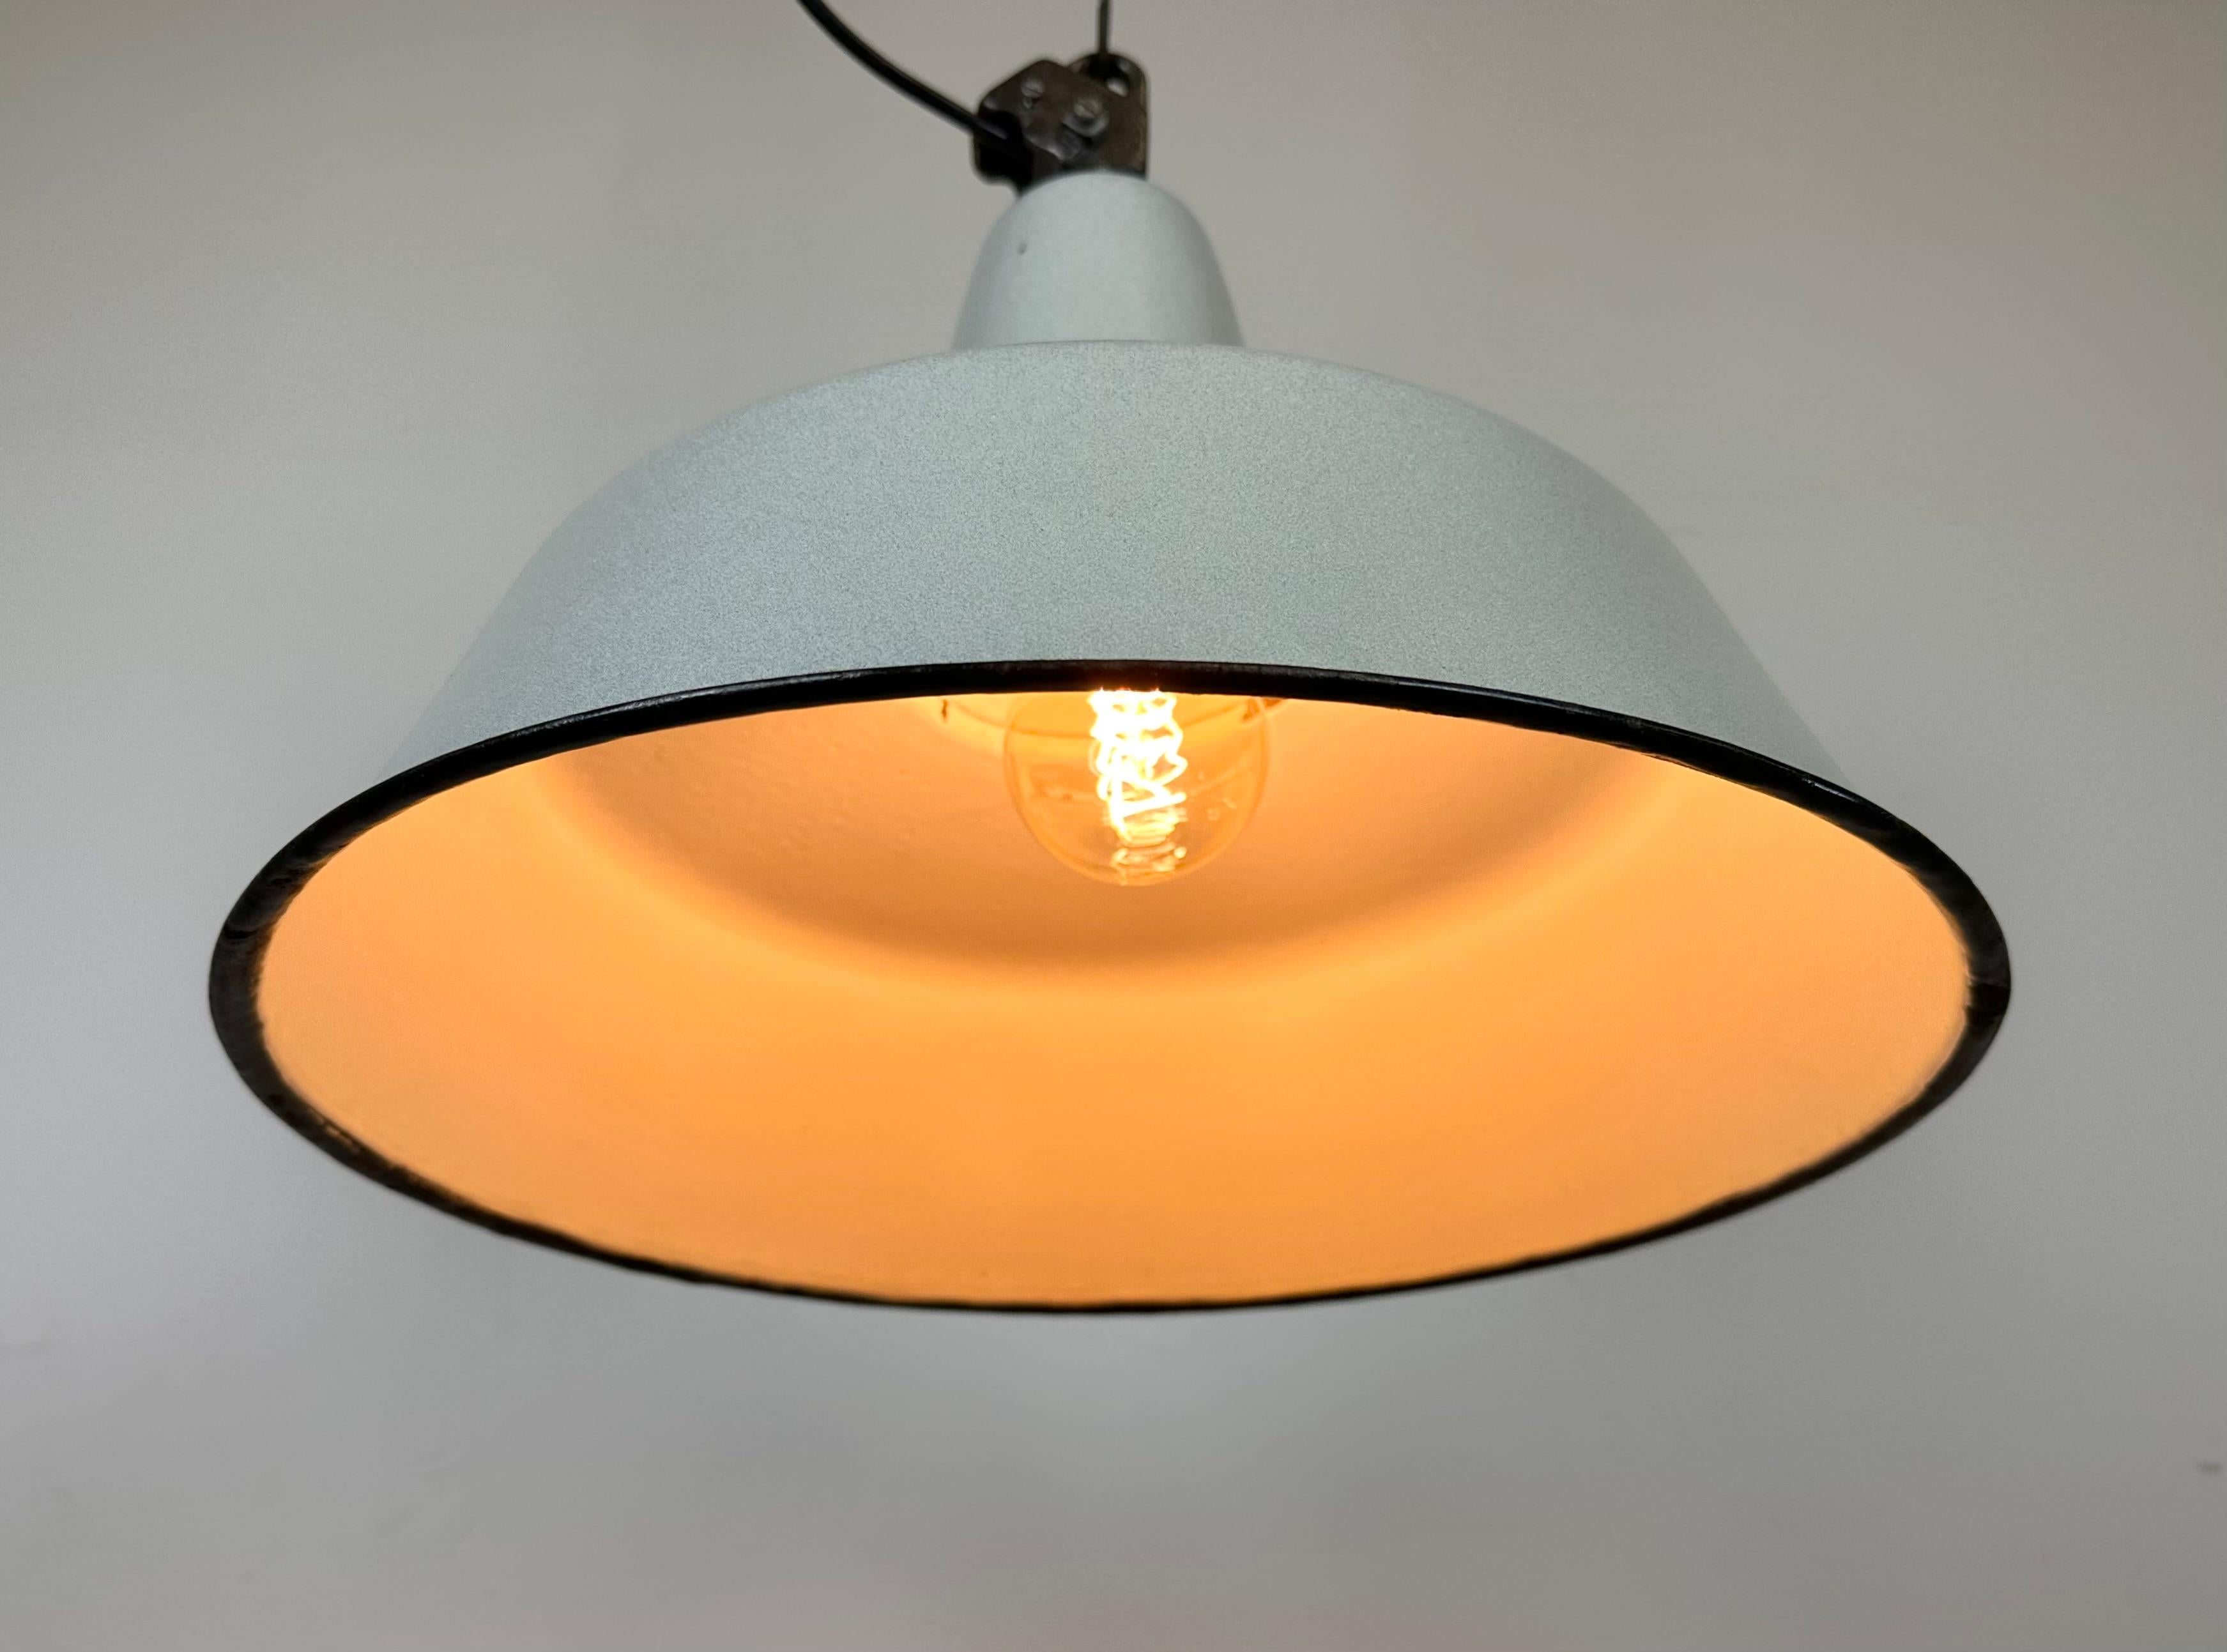 Large Industrial Grey Enamel Factory Pendant Lamp from Zaos, 1960s For Sale 5